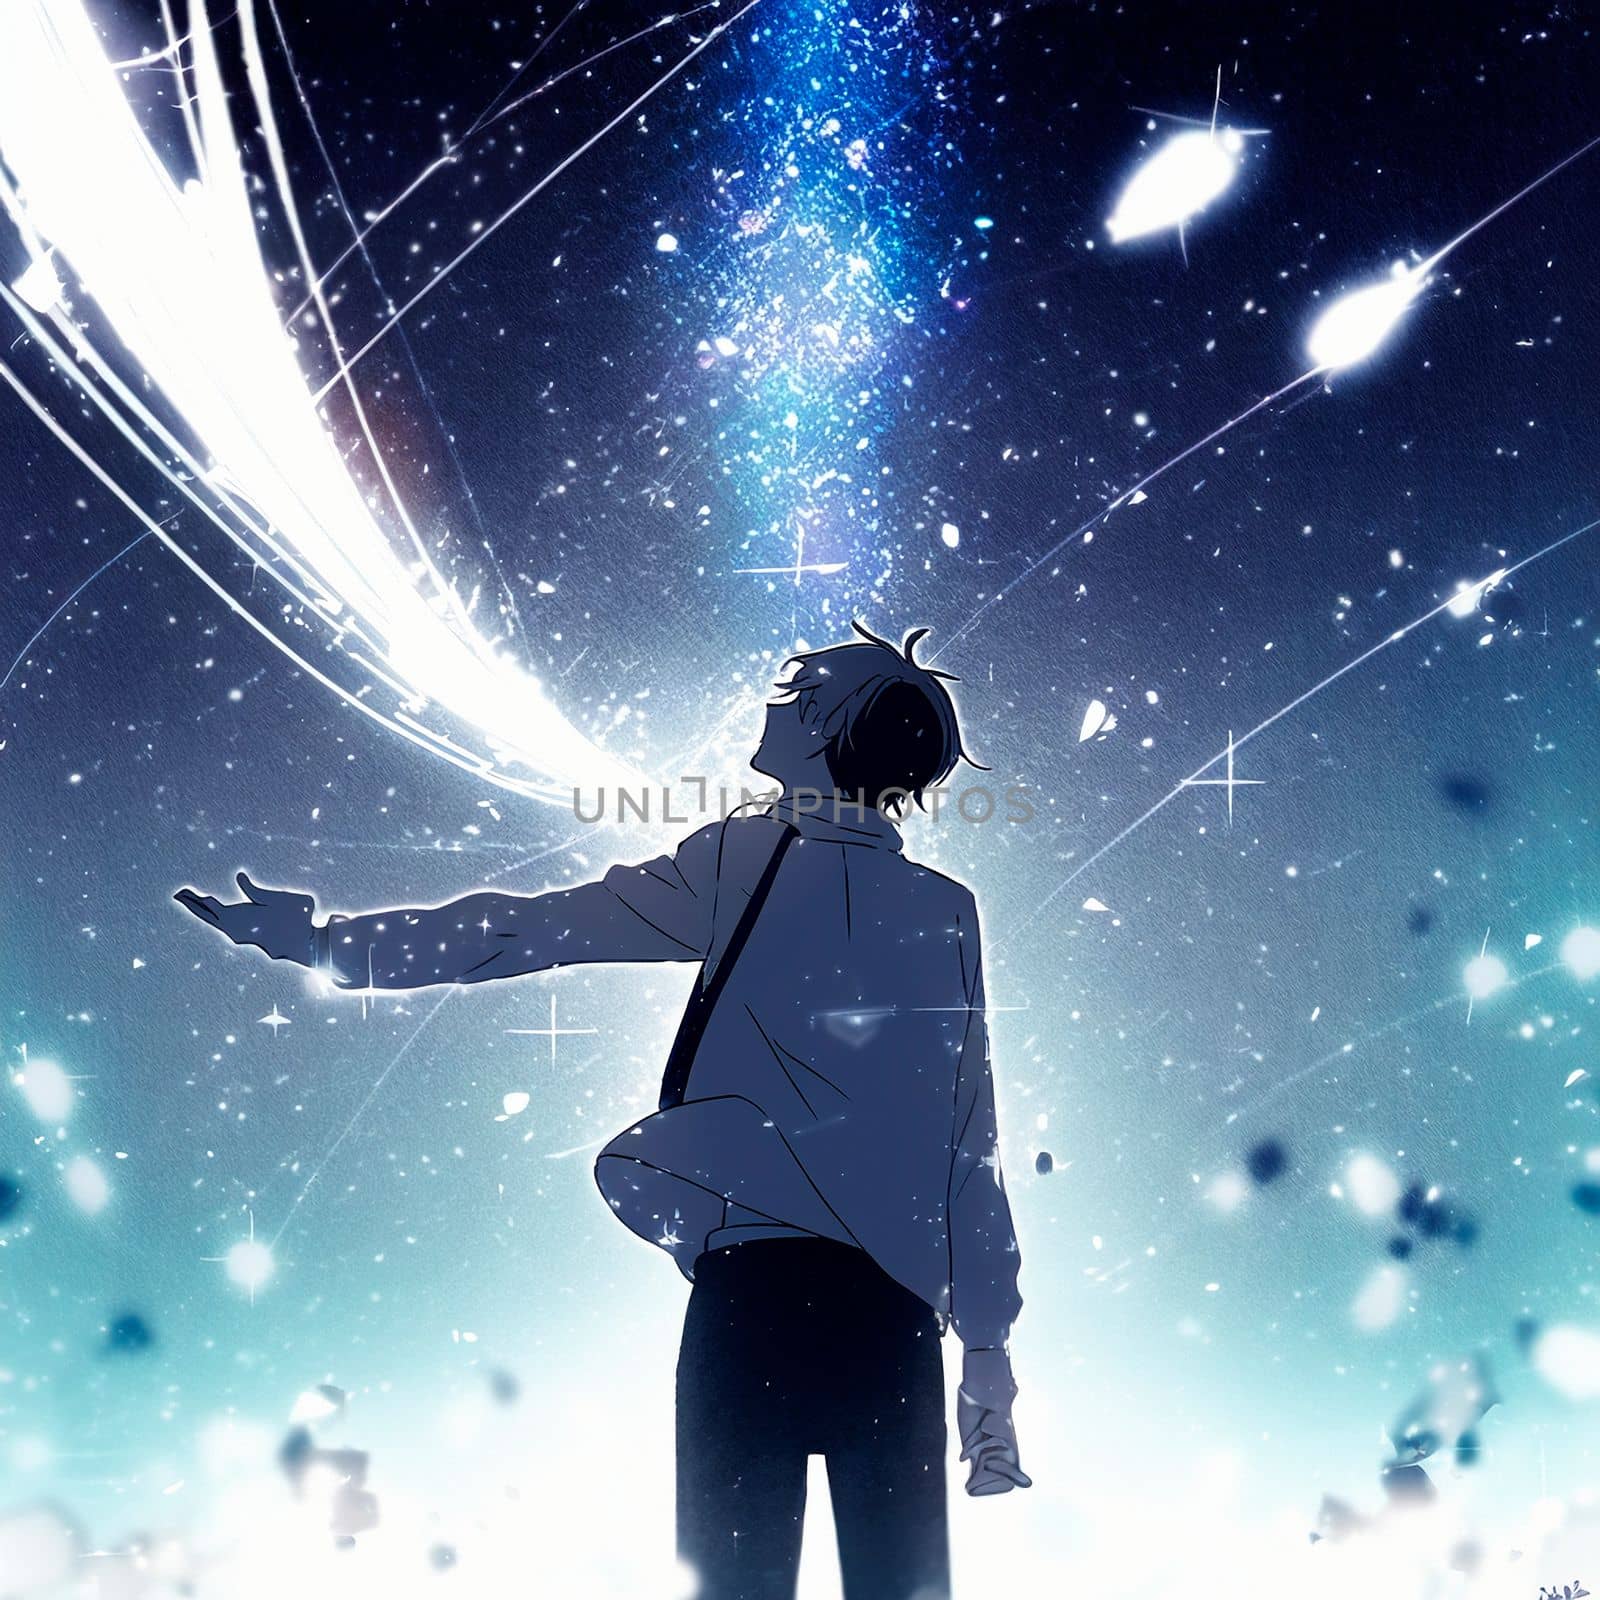 A man under the starry sky in the anime style. High quality illustration